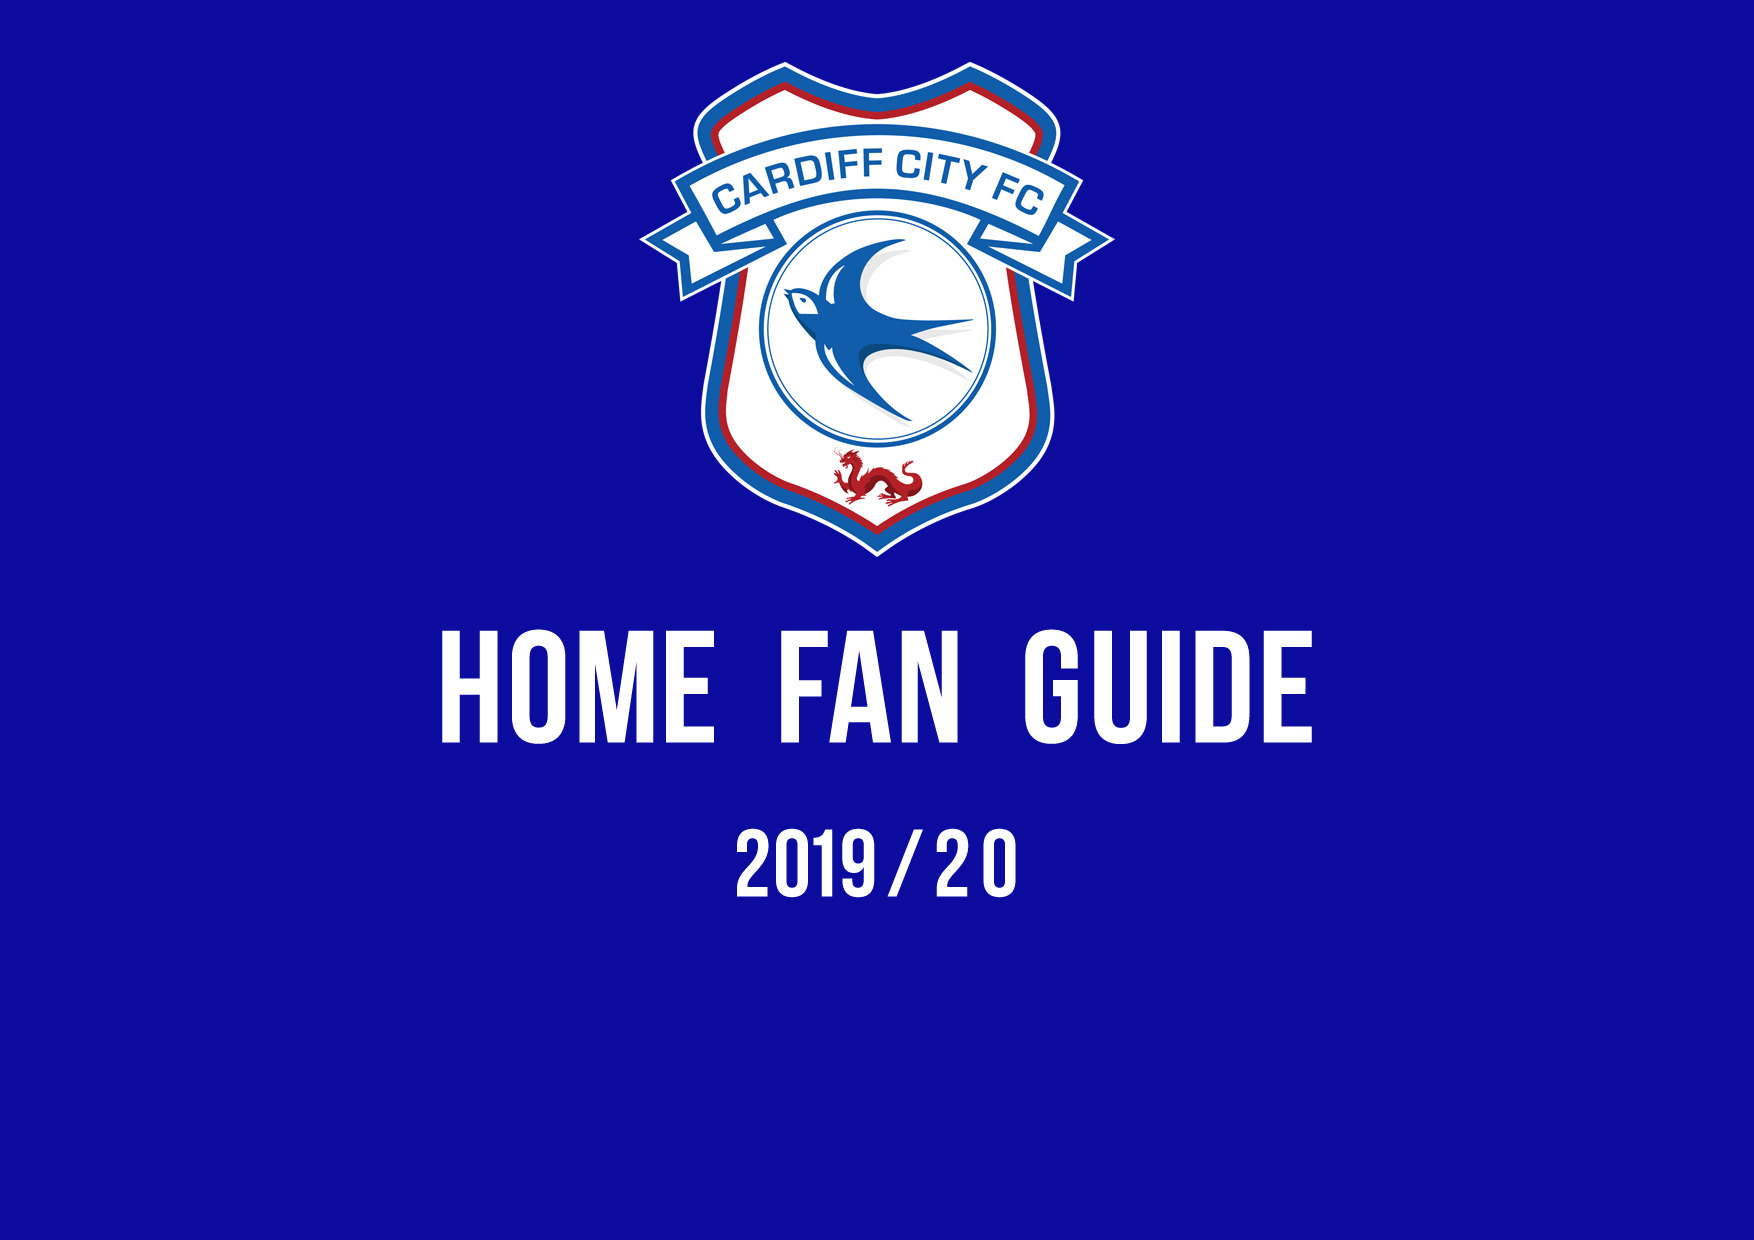 Home fan guide cover